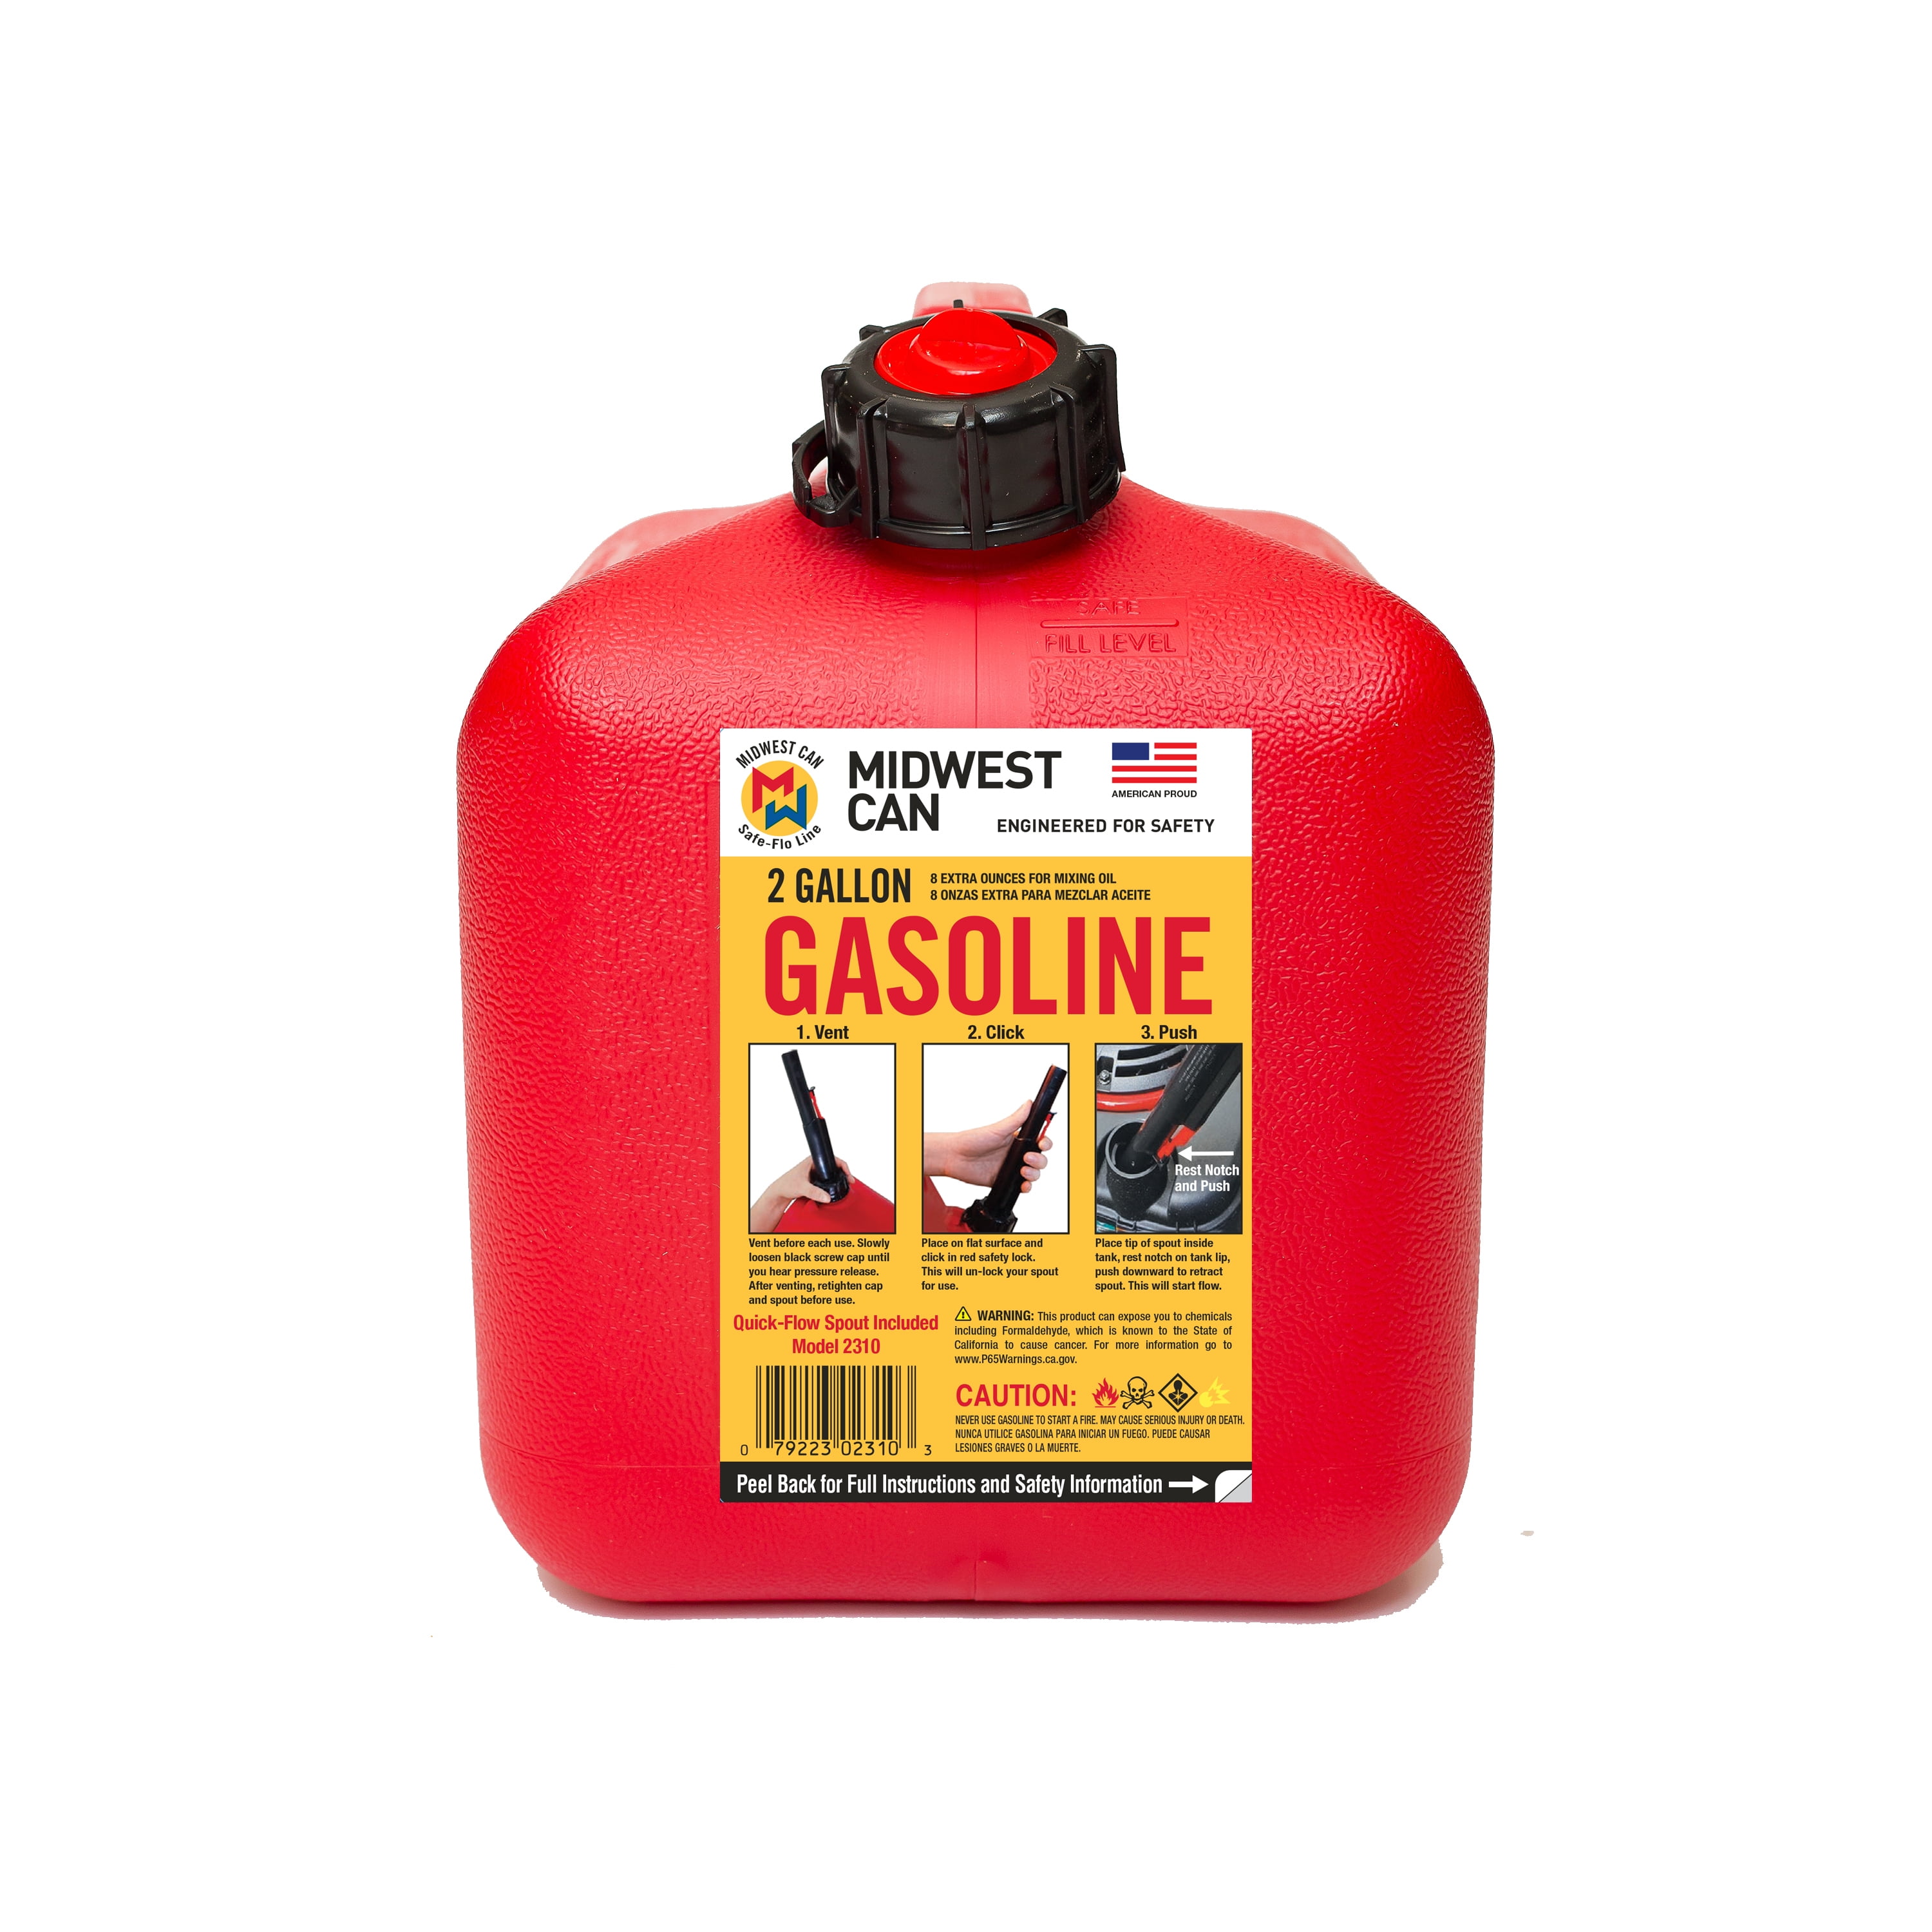 Midwest Can 2 Gallon Auto Shut off Gasoline Can, 2310-4, Red in